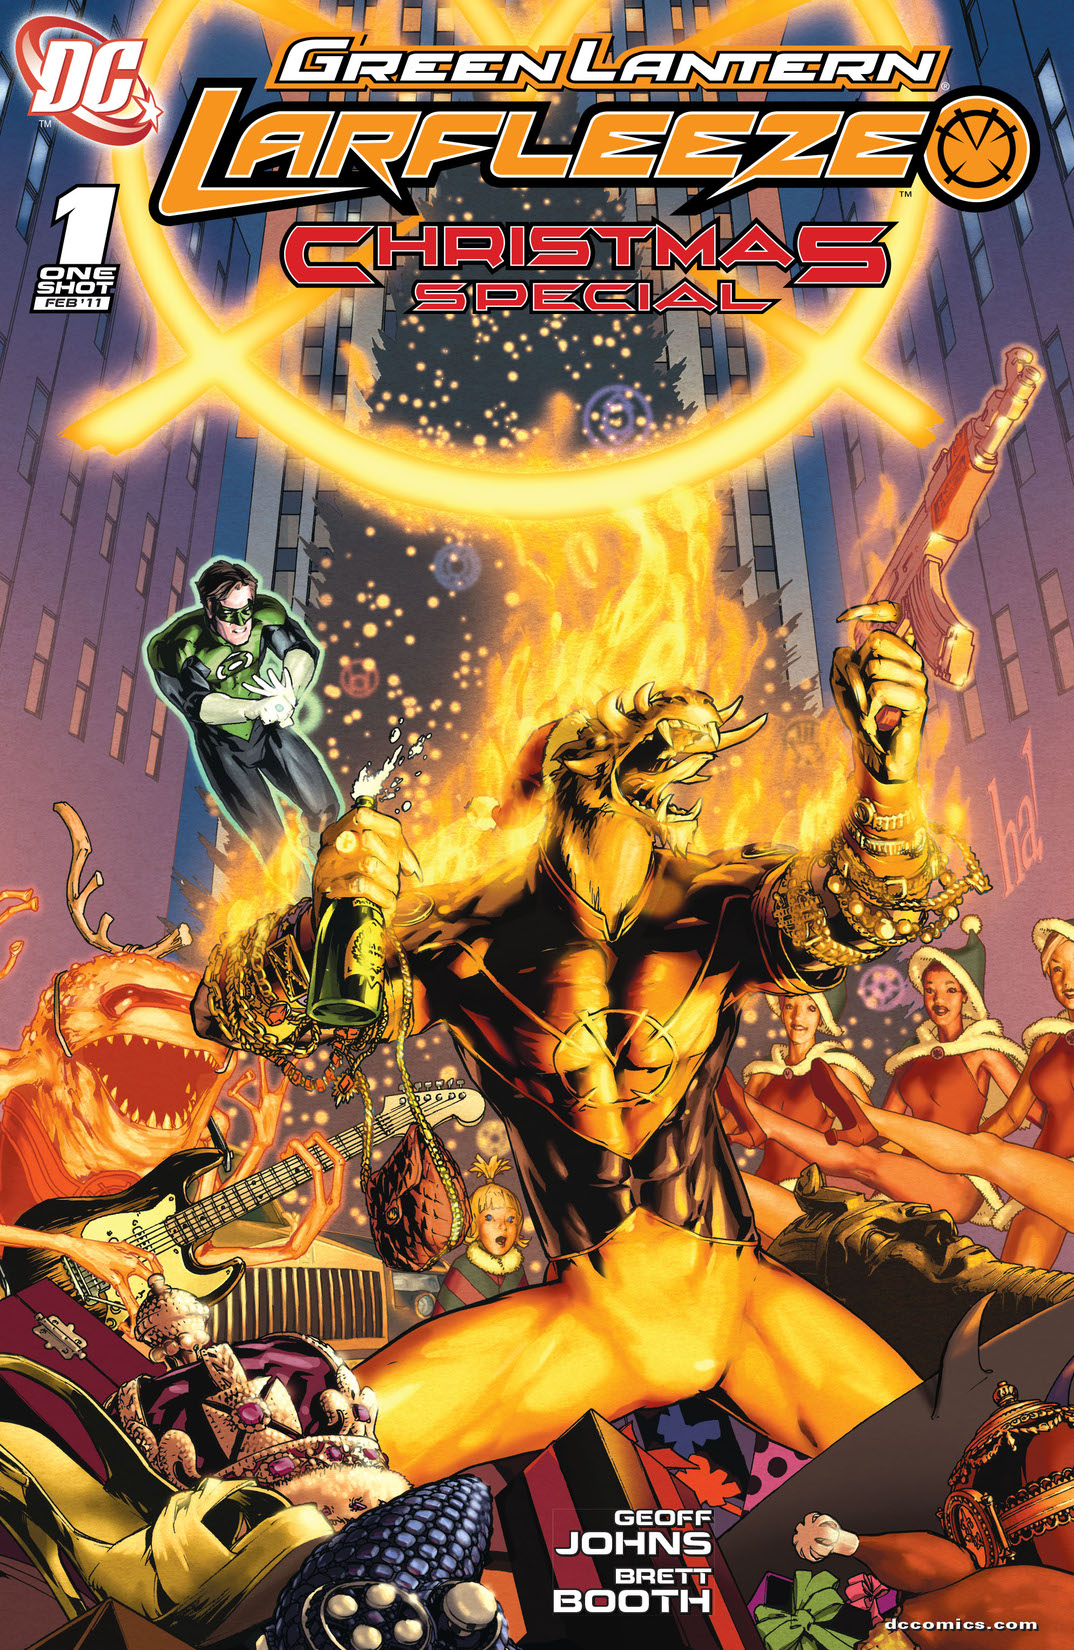 Green Lantern: Larfleeze Christmas Special #1 preview images